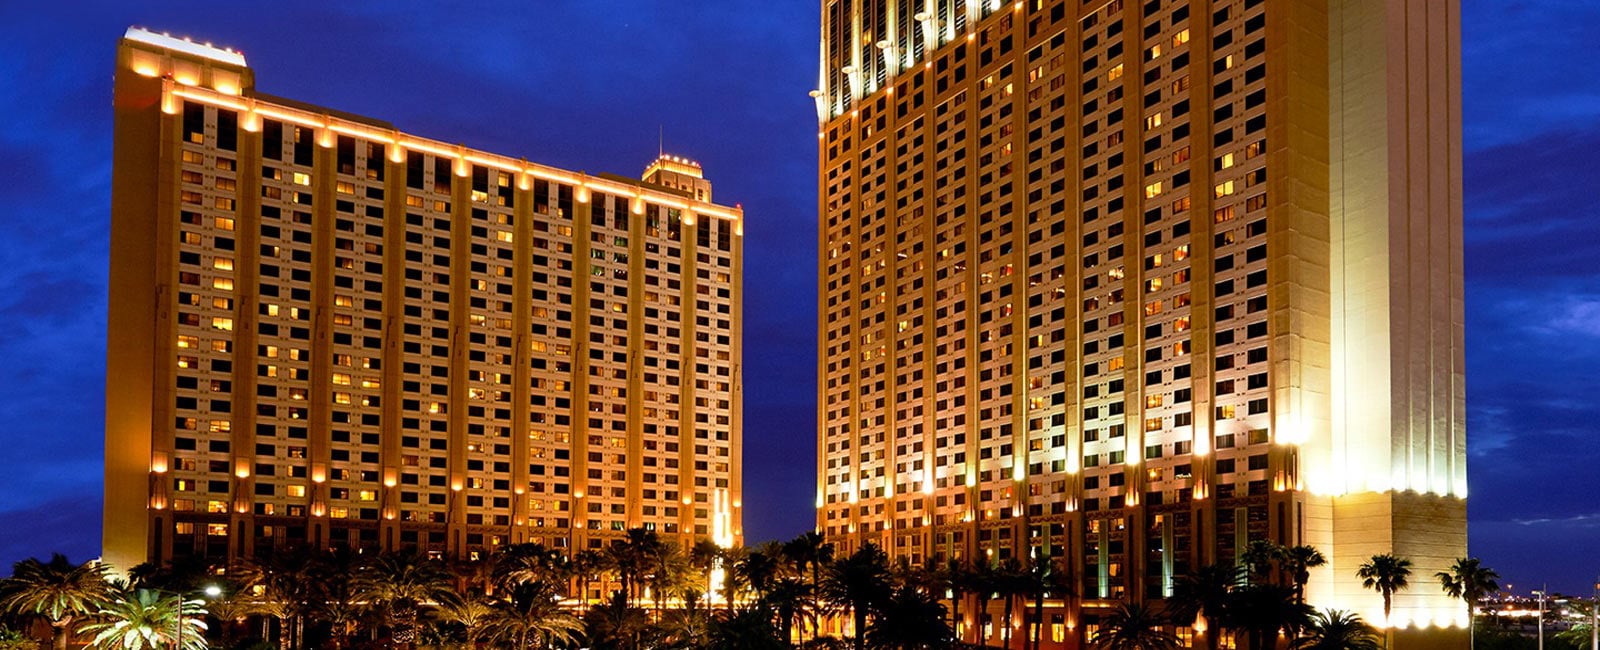 Exterior of Hilton Grand Vacations on the Boulevard in Las Vegas, Nevada